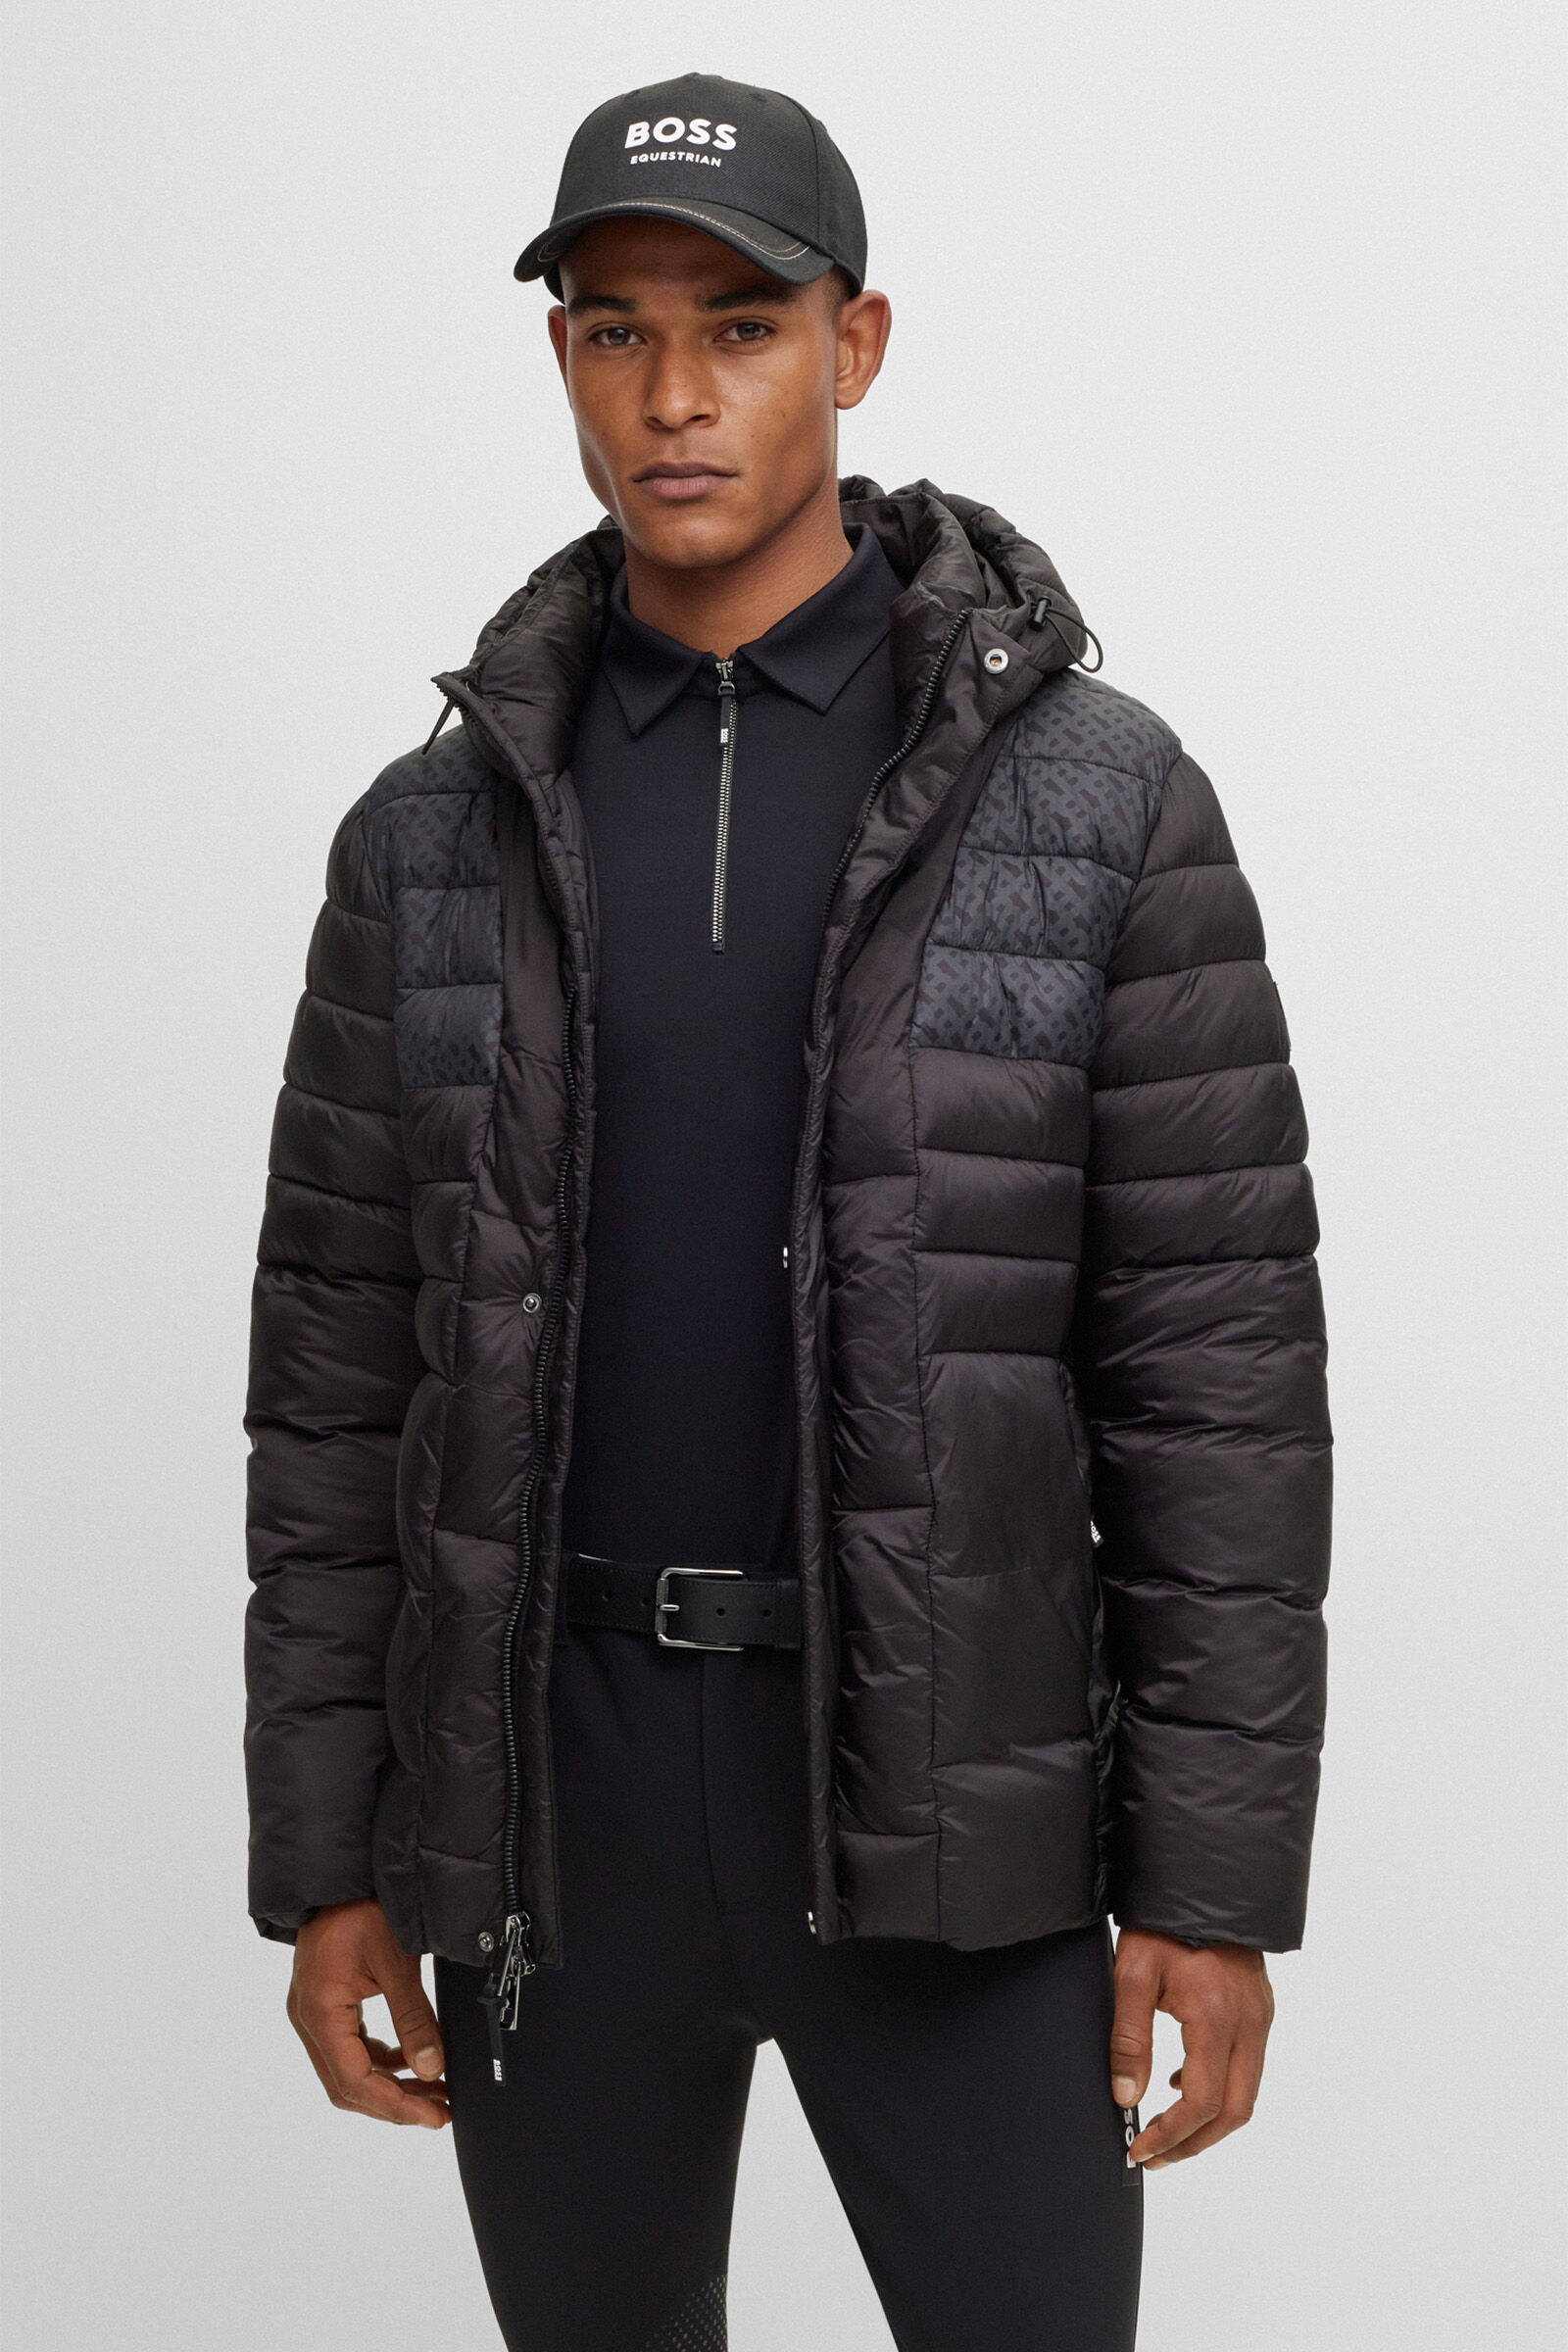 Trapstar Puffer Jacket Designer Decoded Hooded Down Jackets Doudoune  Trapstars Winter Fashion Thick Warm Parka Homme Giacca Windproof Outdoor  Coat Removable Cap From Rostir01, $131.99 | DHgate.Com